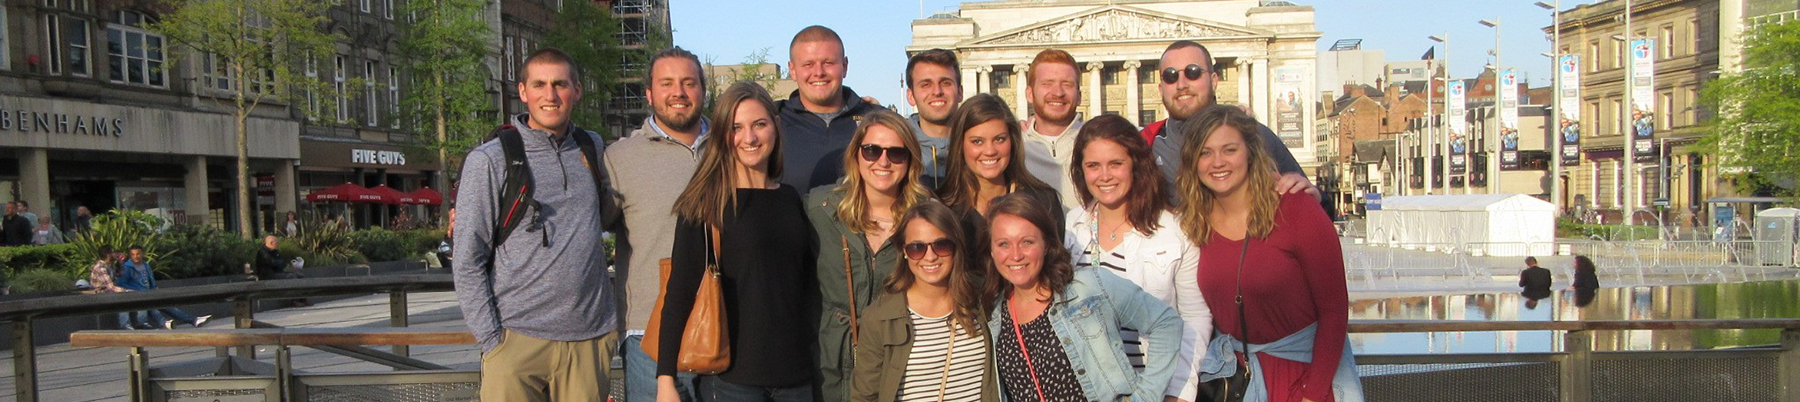 A group of Marian University students in Europe.